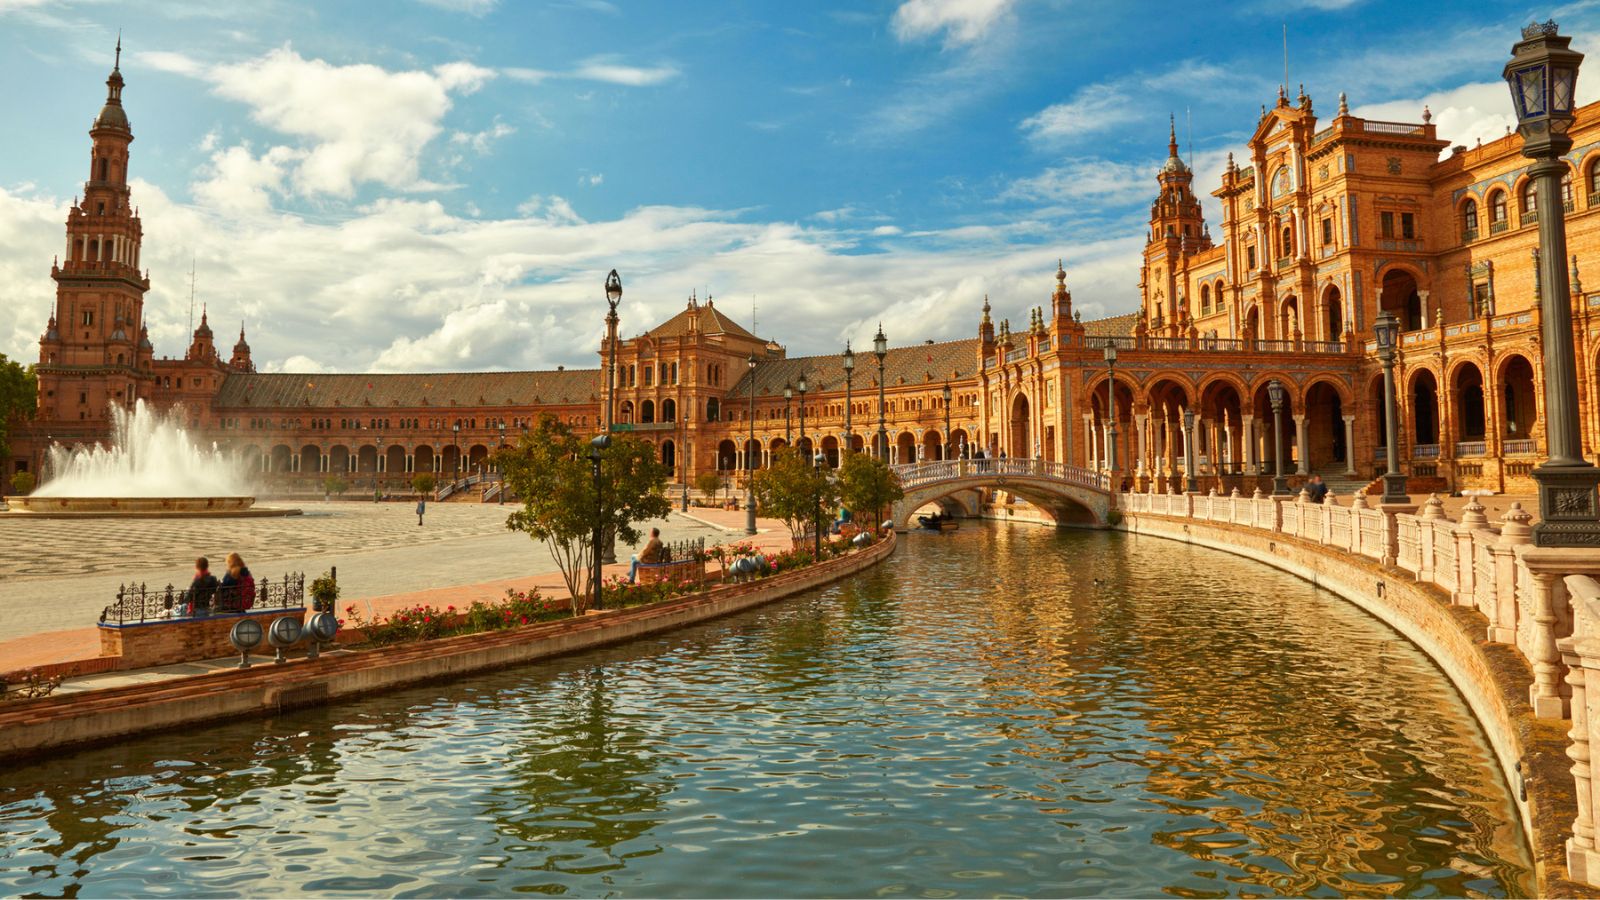 <p><span>Located inland in southern Spain, Seville is the historic capital city of Andalusia. Expect a unique blend of architectural influences that reflect its long and fascinating past.</span></p><p><span>Expect old Moorish buildings (the most famous example is the Royal Alcazar of Seville – Europe’s oldest royal palace), as well as Gothic (e.g., Seville’s 13th Century Cathedral), Baroque (e.g., the Archbishop’s Palace), and Modernist architecture (e.g., the Metropol Parasol, or “Las Setas”), among others.</span></p><p><strong>MORE ARTICLES LIKE THIS COMING UP:</strong></p>